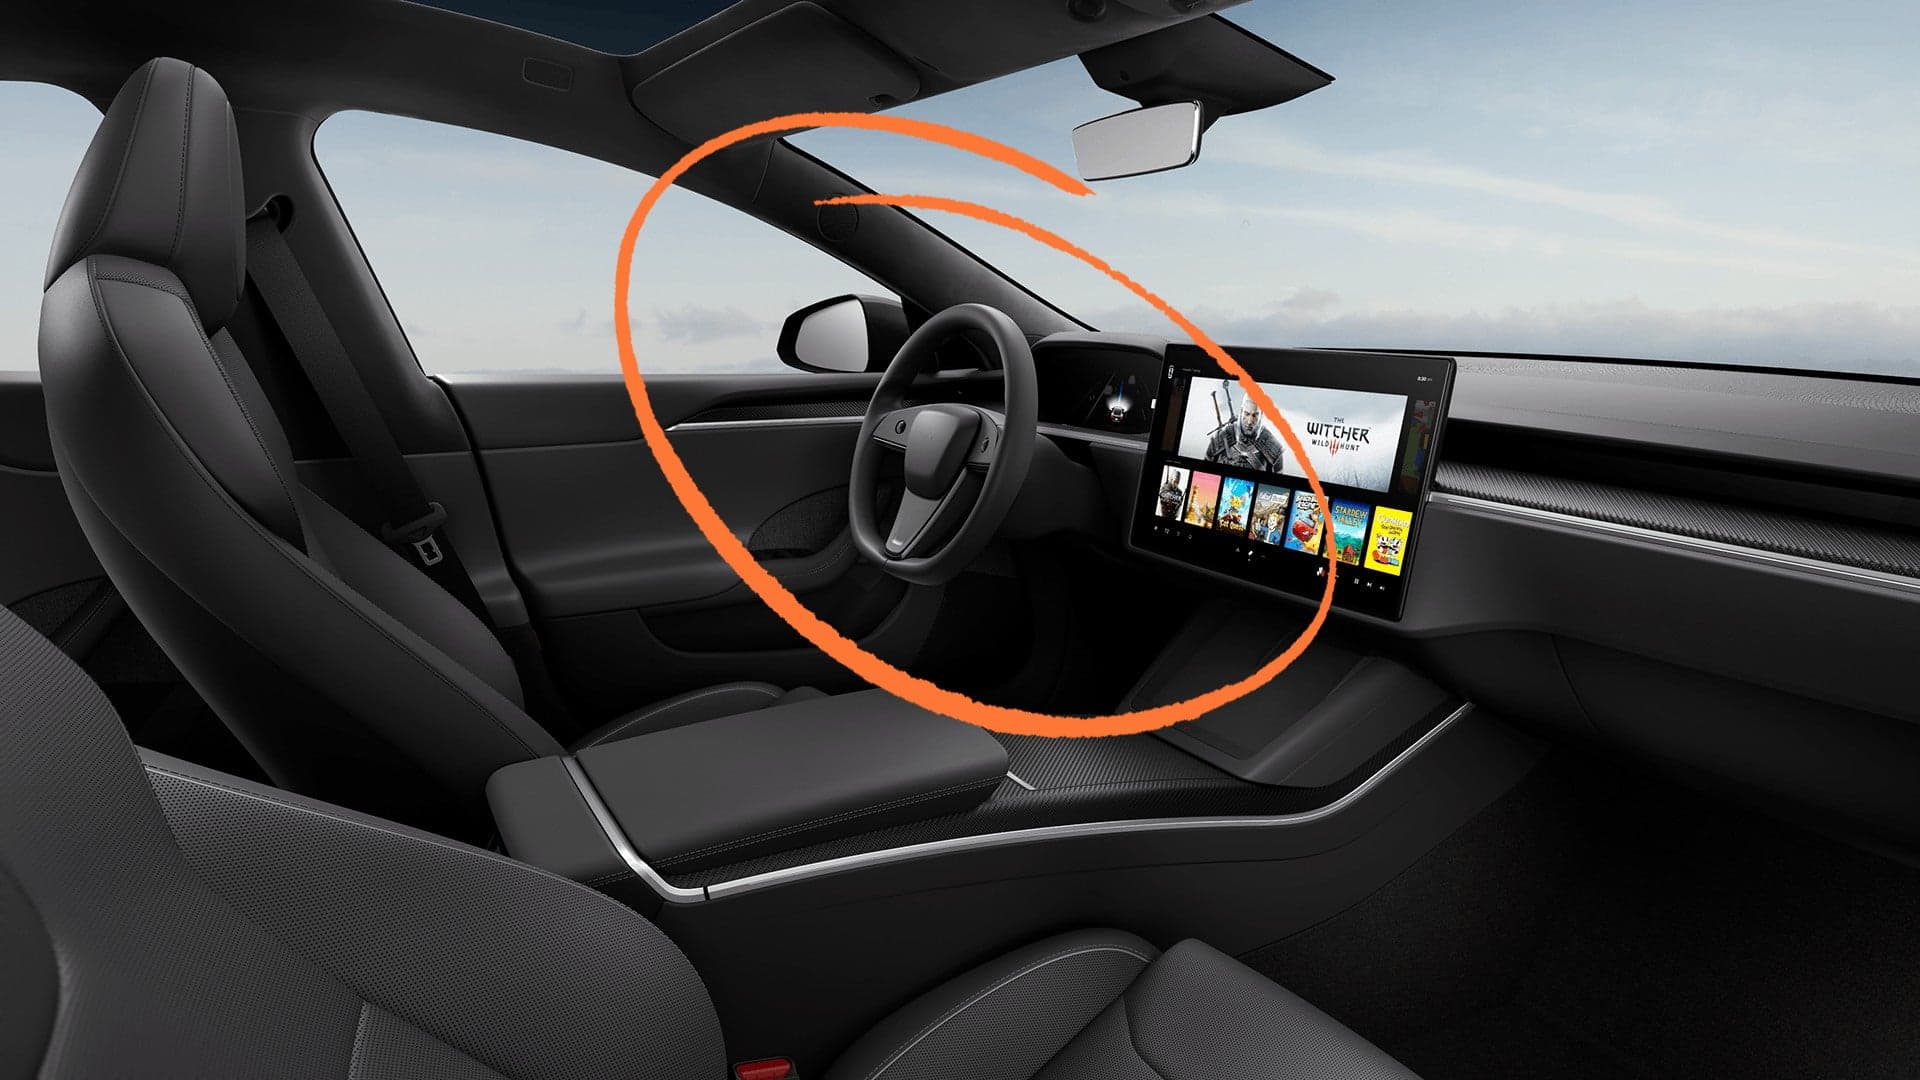 Tesla Site Code Shows Refreshed Model S with a Regular Old Steering Wheel, Not a Yoke [UPDATED]